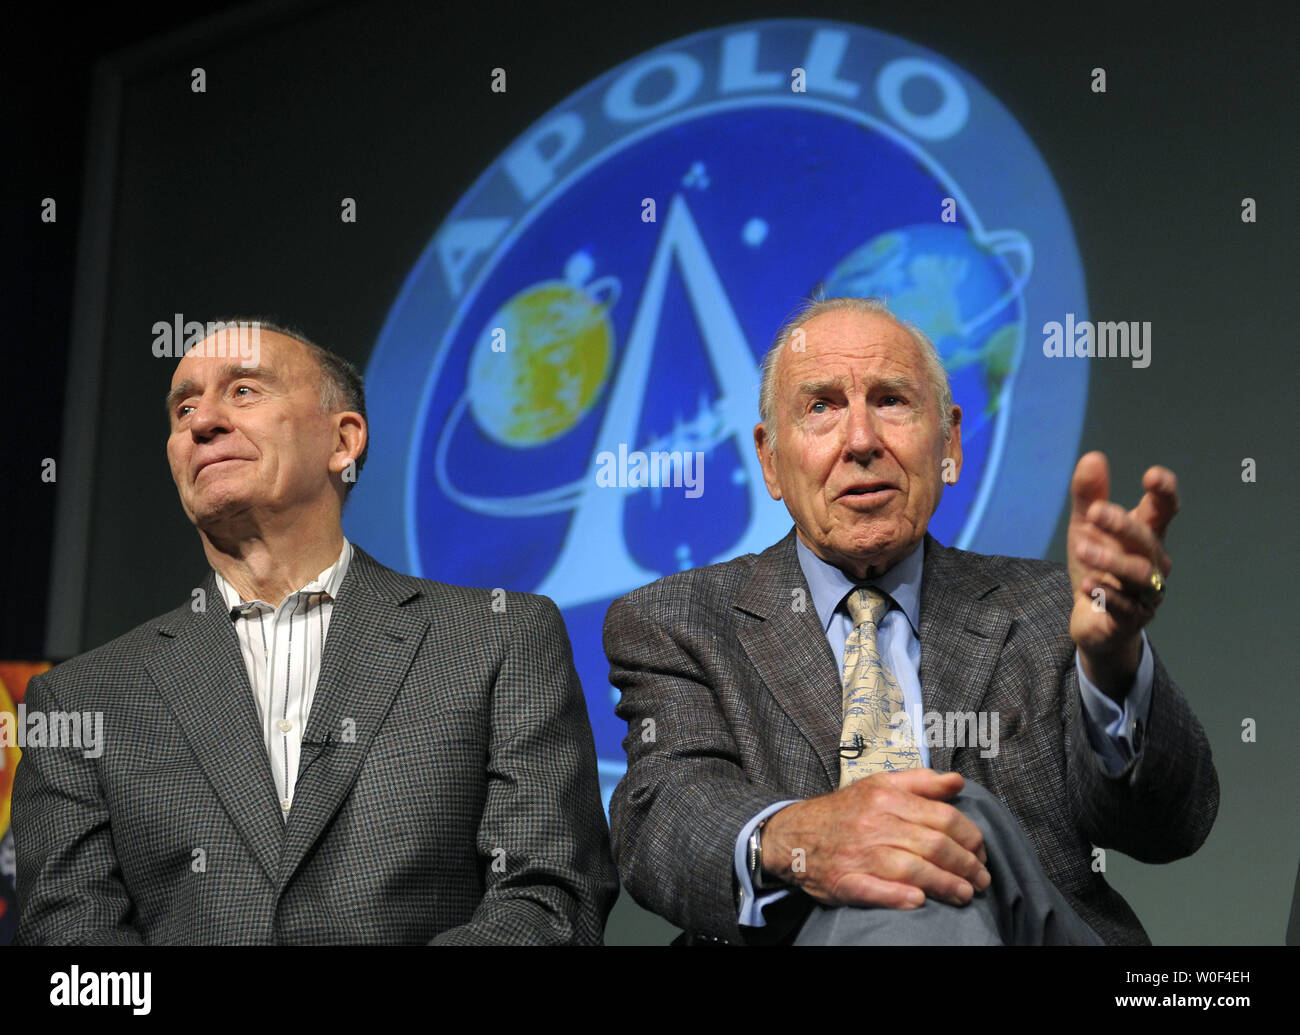 Former Apollo 7 and Apollo 13 astronaut James Lovell (R) and former Apollo 7 astronaut Walt Cunningham speak on their experiences at NASA during a press conference on the 40th anniversary of the lunar landing at NASA headquarters in Washington on July 20, 2009. (UPI Photo/Kevin Dietsch) Stock Photo